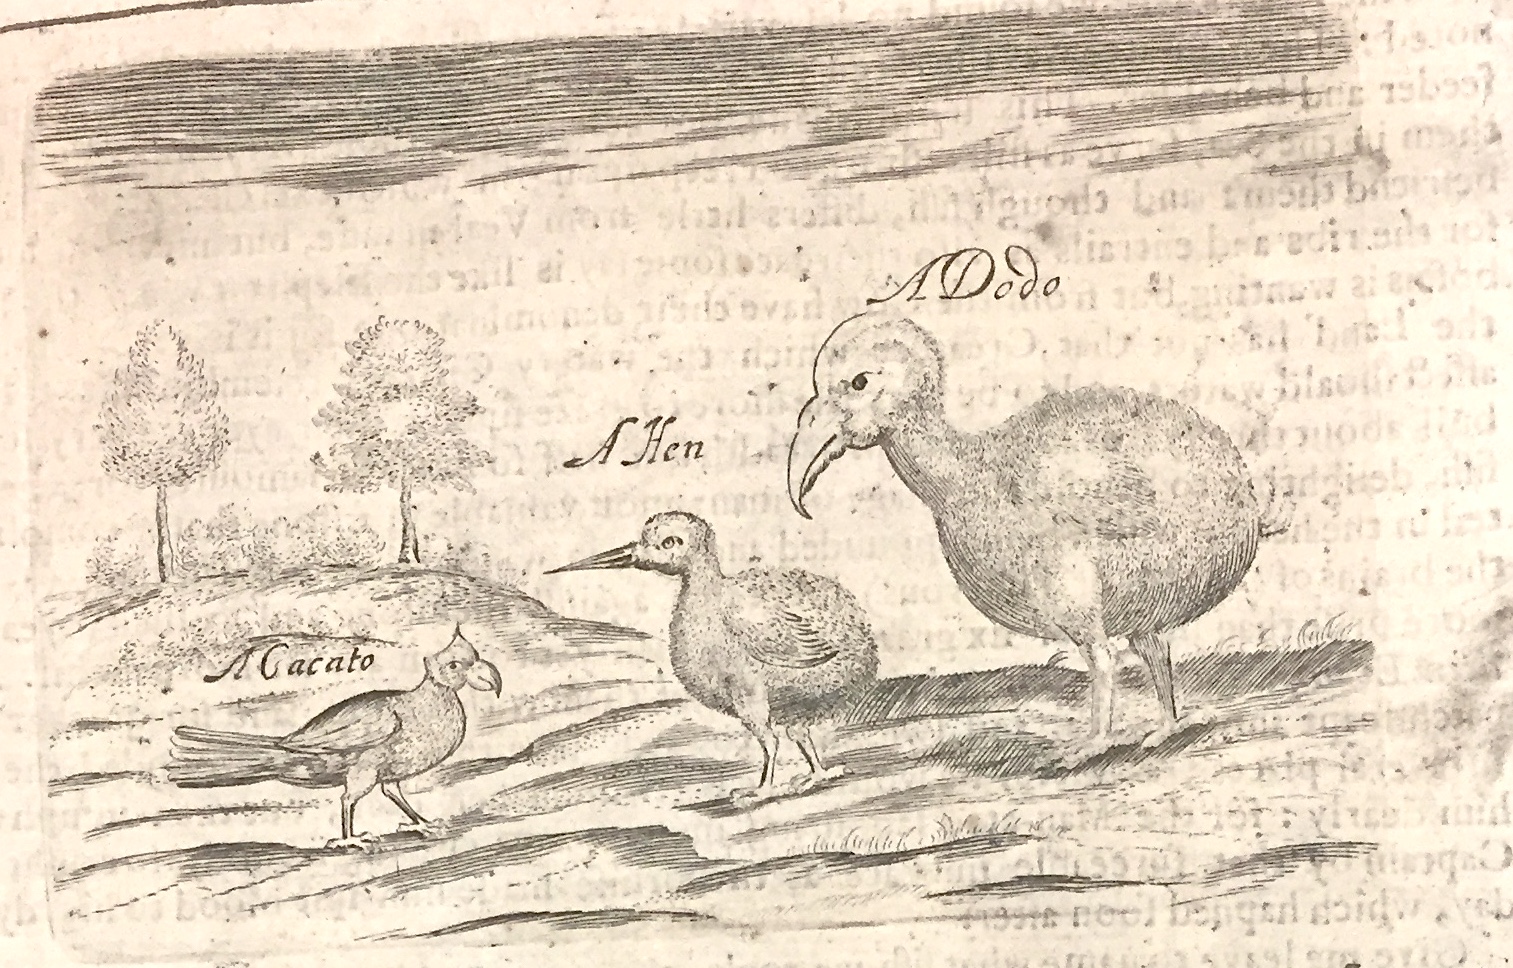 Object of the week: The diplomat & the dodo - 17th century, Birds, featured, Object of the week, Open Roads, Sir Thomas Herbert Bar, Travel, travellers, Travelogues